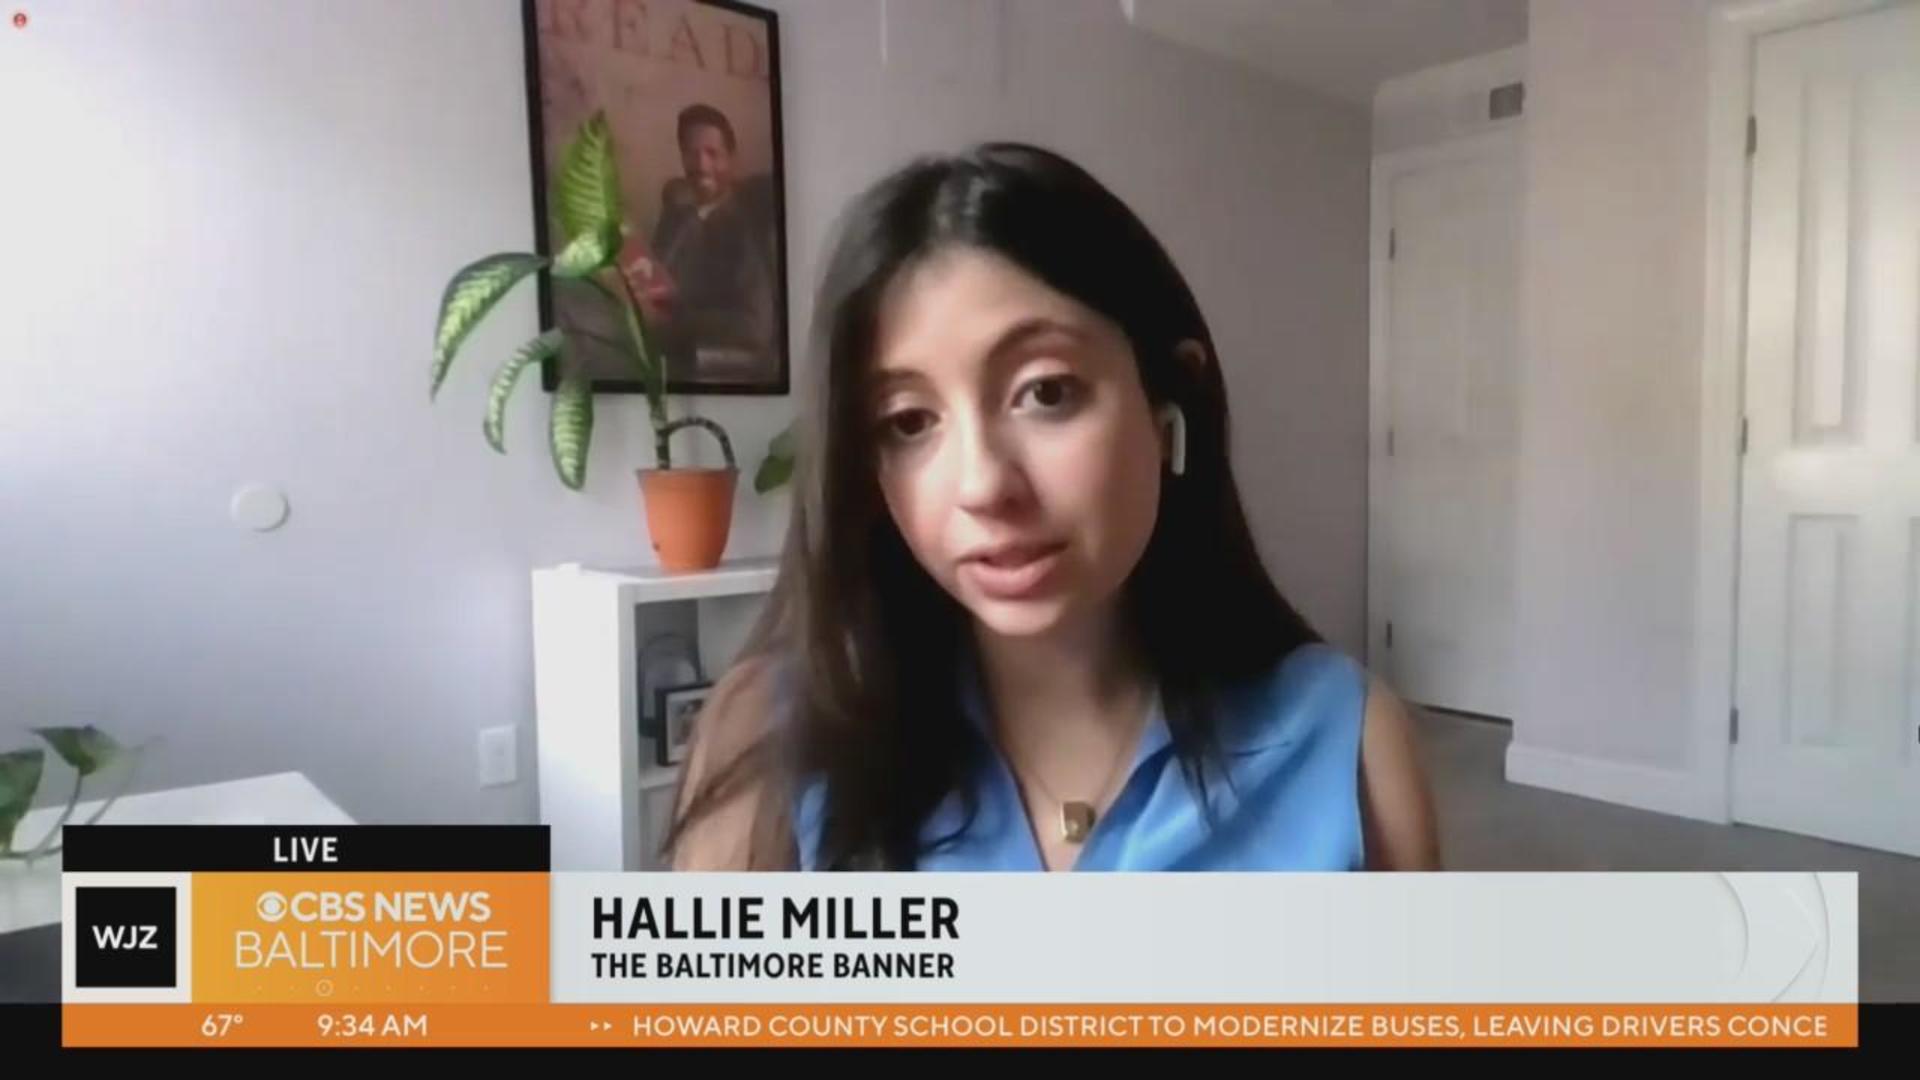 School Girlxxx - Hallie Miller discusses housing and construction permits in Baltimore - CBS  Baltimore